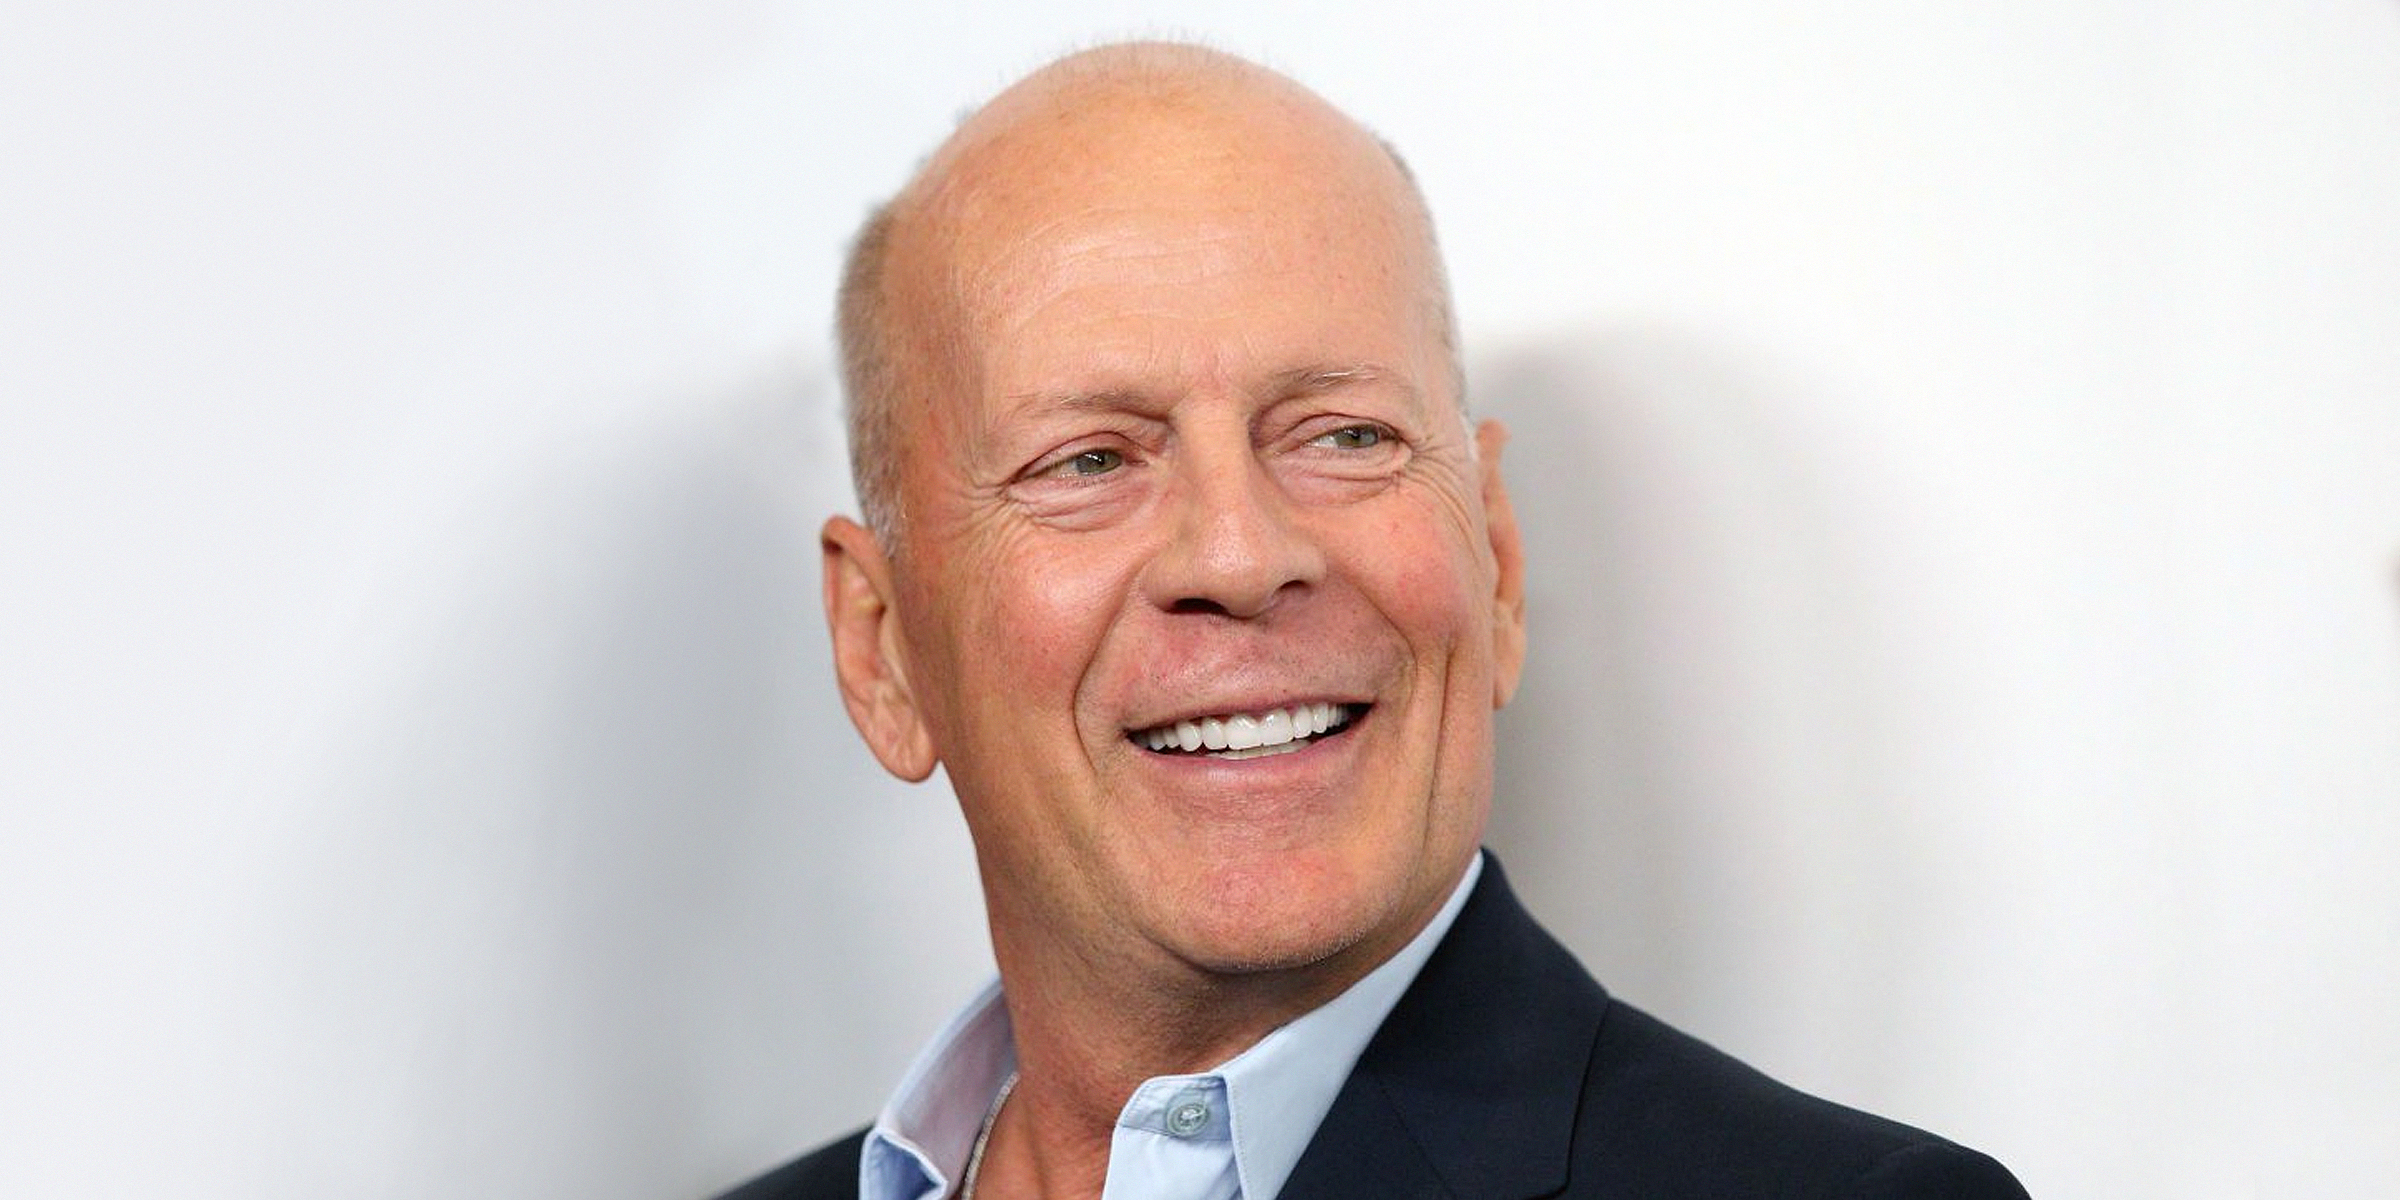 Bruce Willis | Source: Getty Images